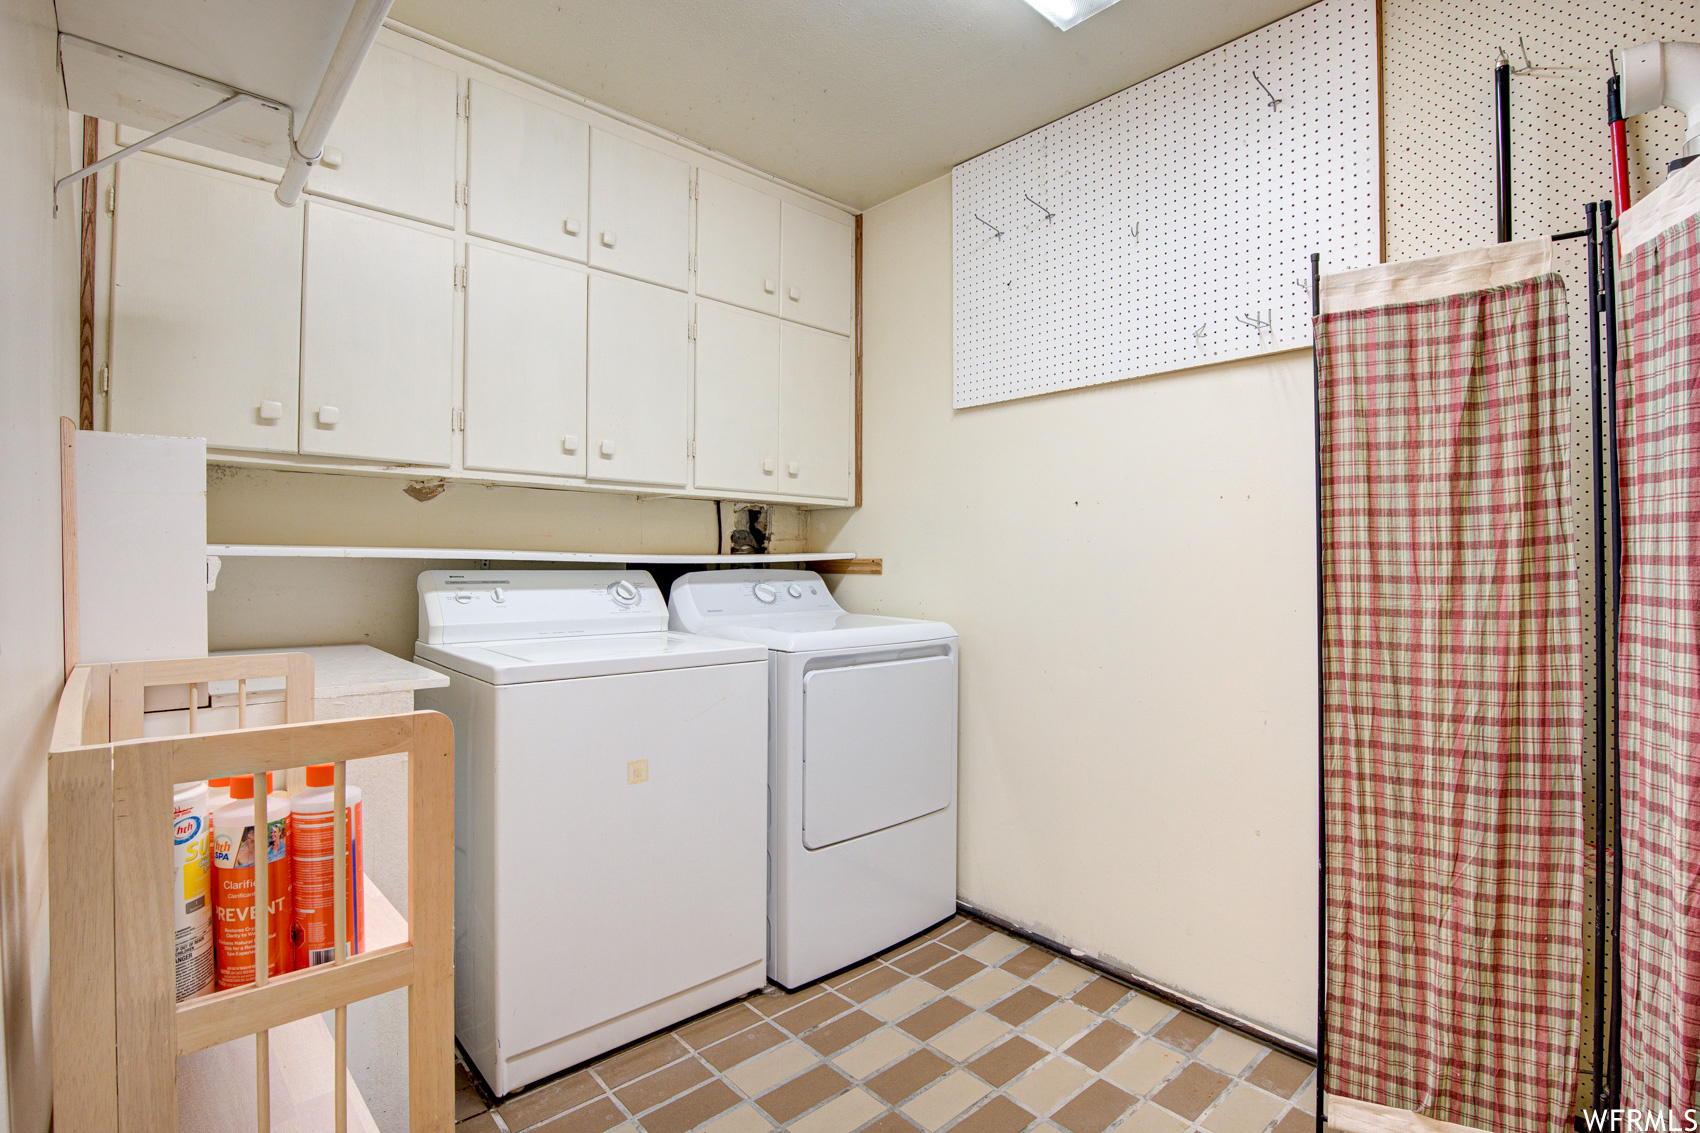 Laundry room featuring cabinets, separate washer and dryer, and light tile floors